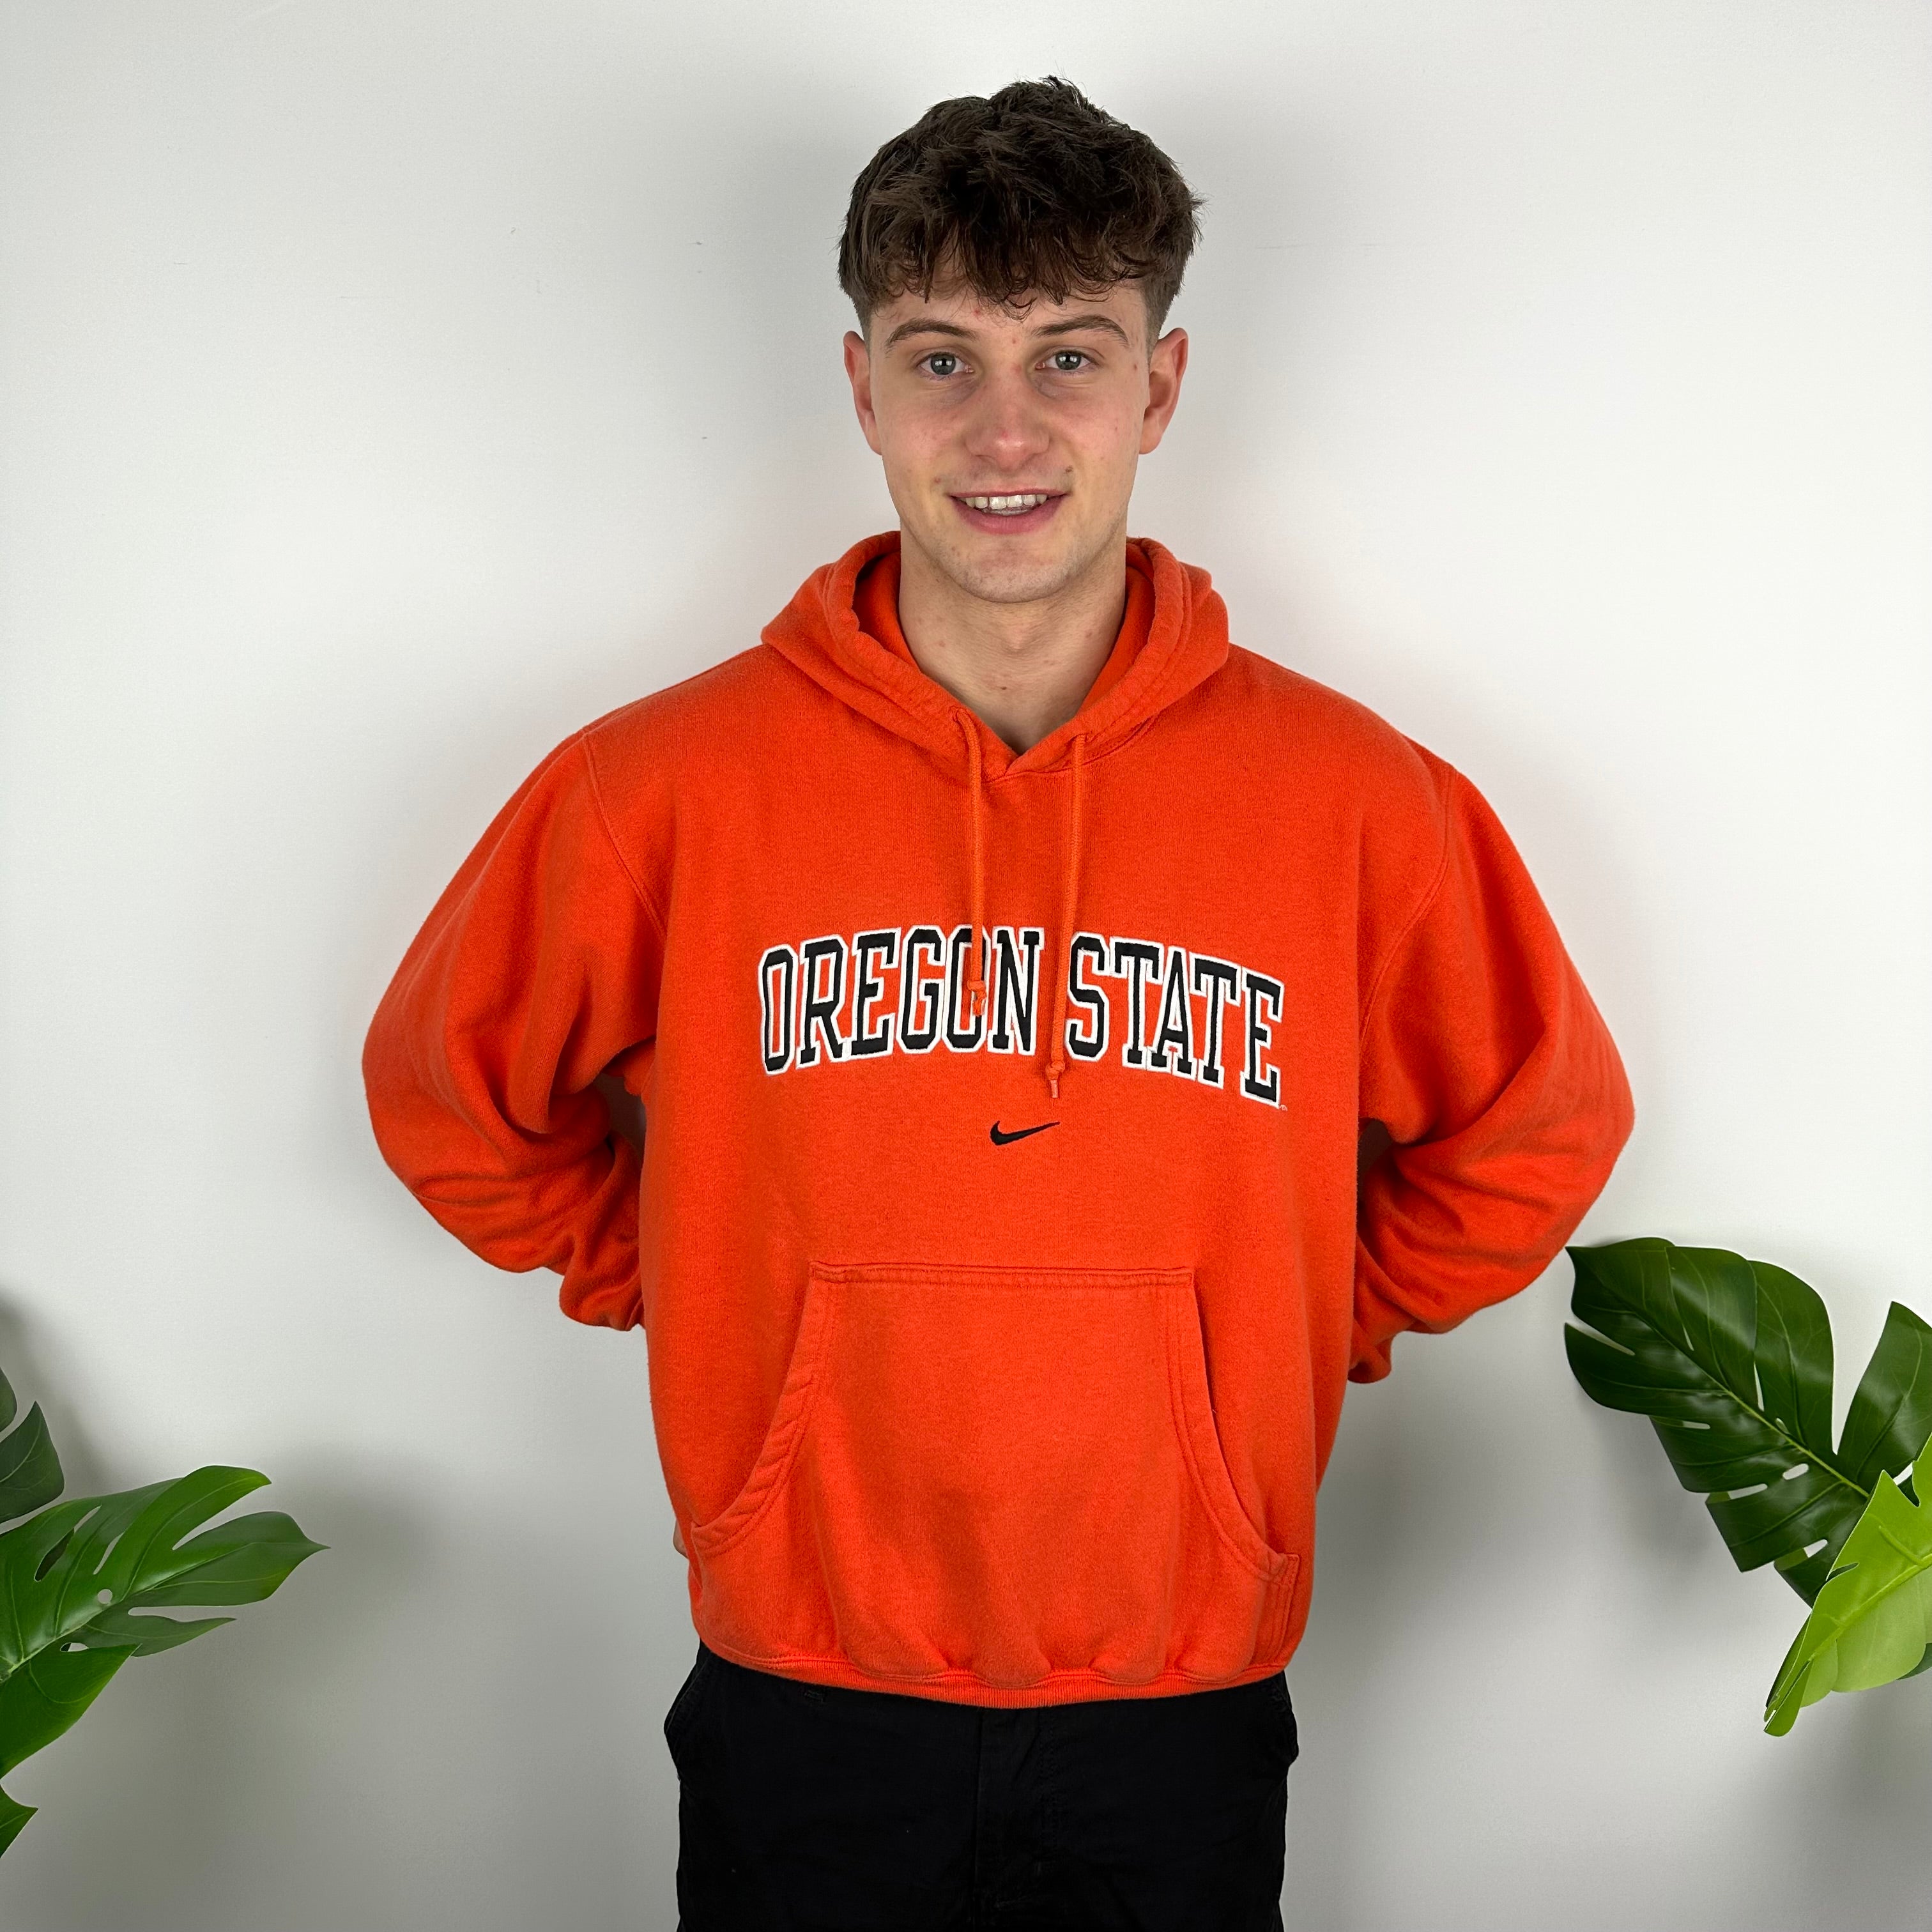 Nike x Oregon State Orange Embroidered Spell Out Hoodie (S)